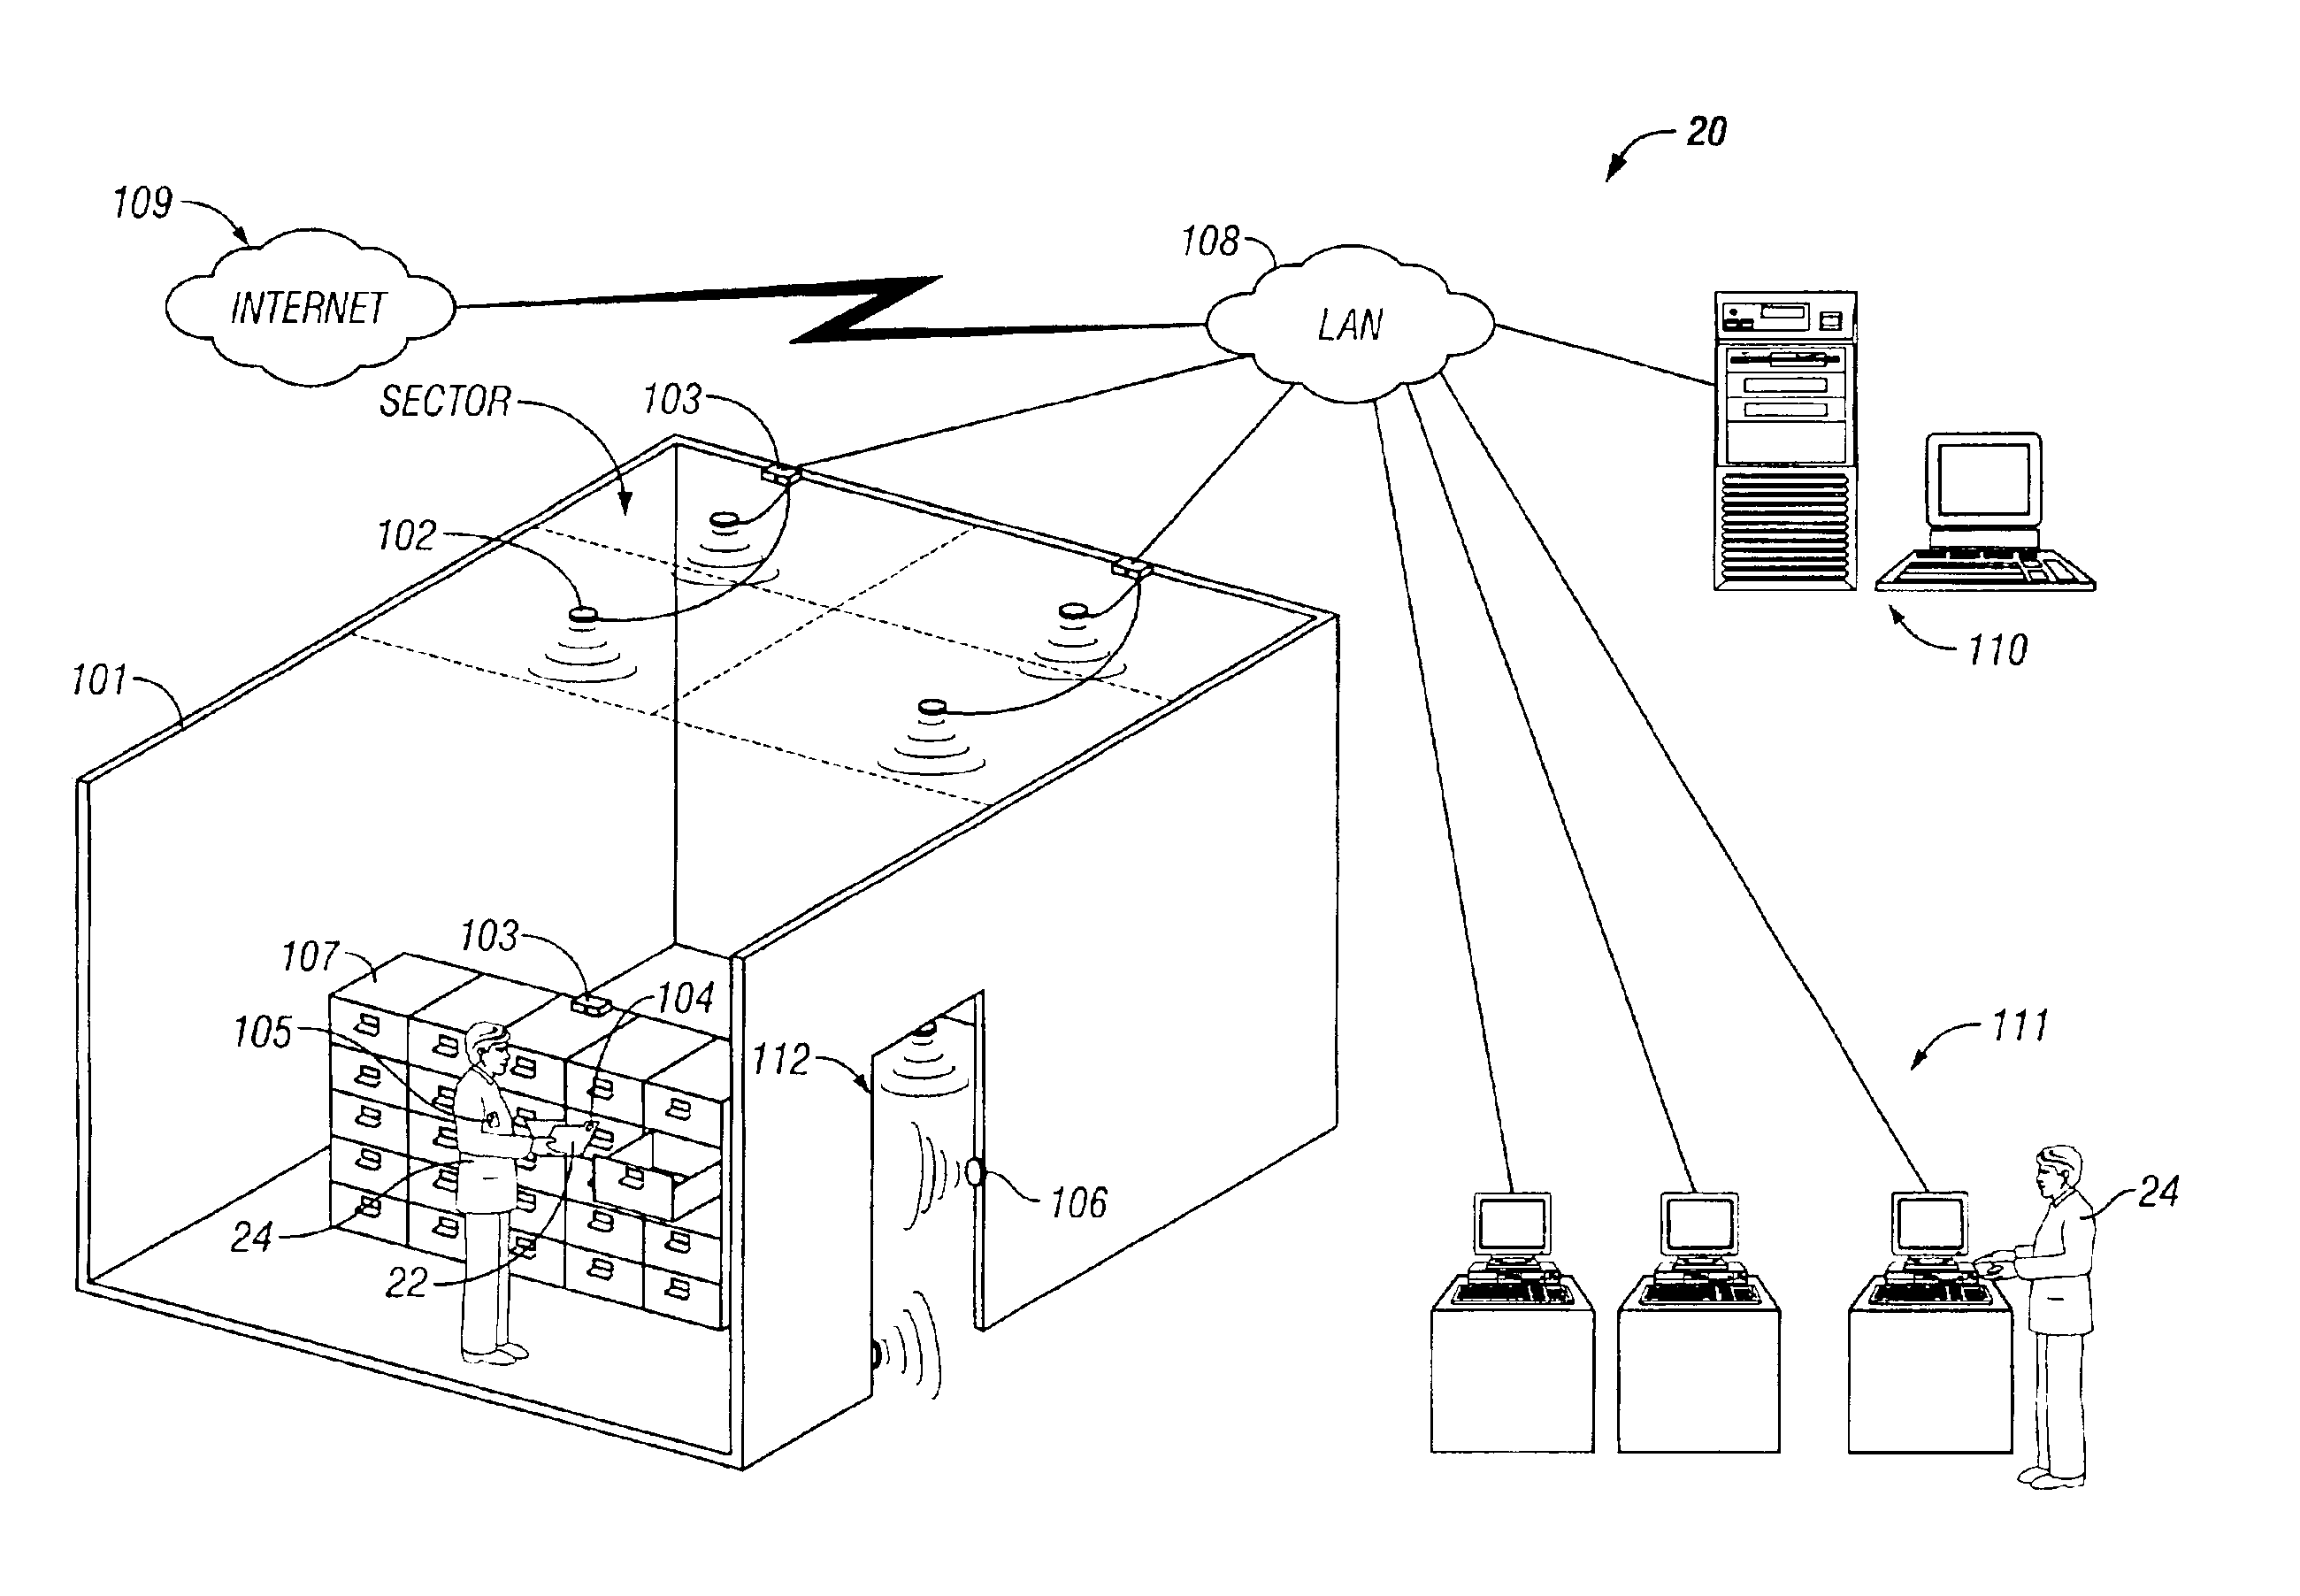 Method and apparatus for tracking objects and people